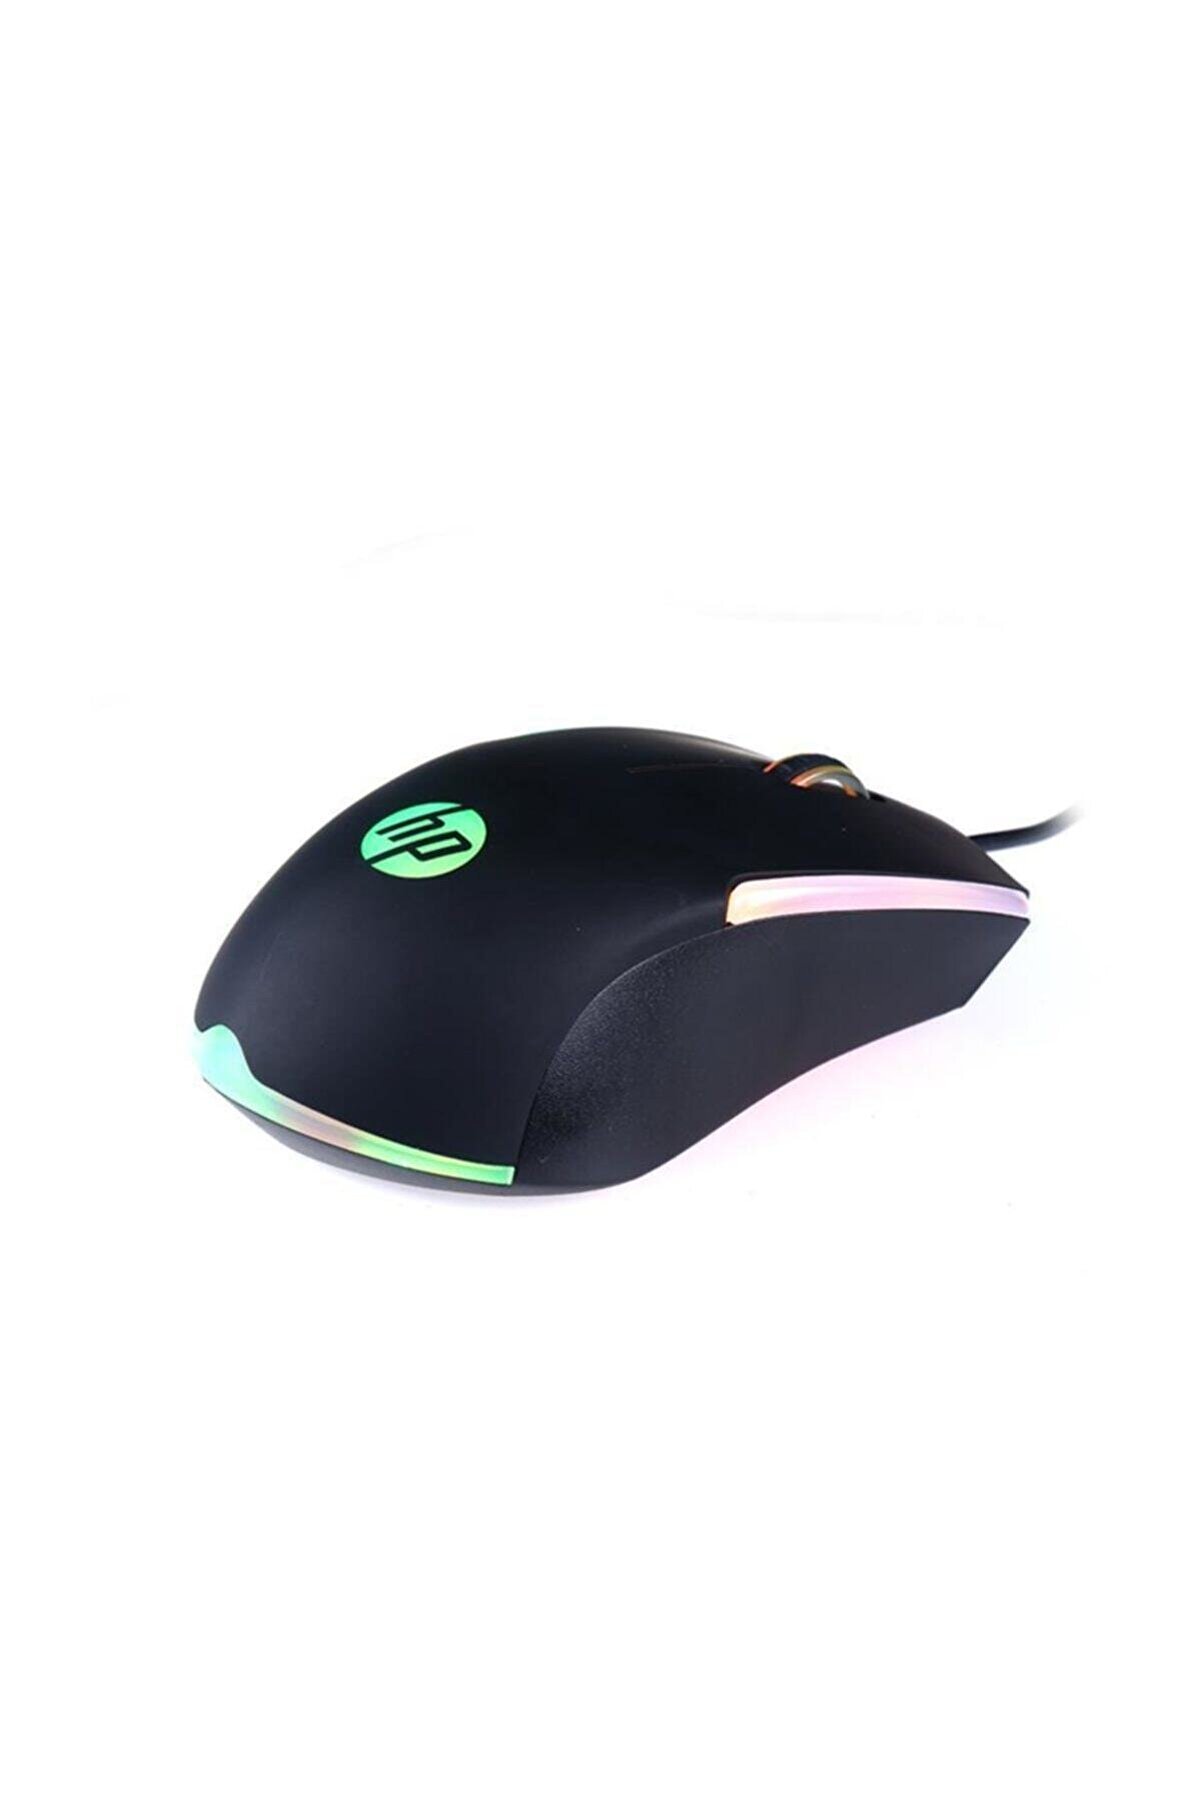 HPC Mouse Hp Gaming Mouse M160